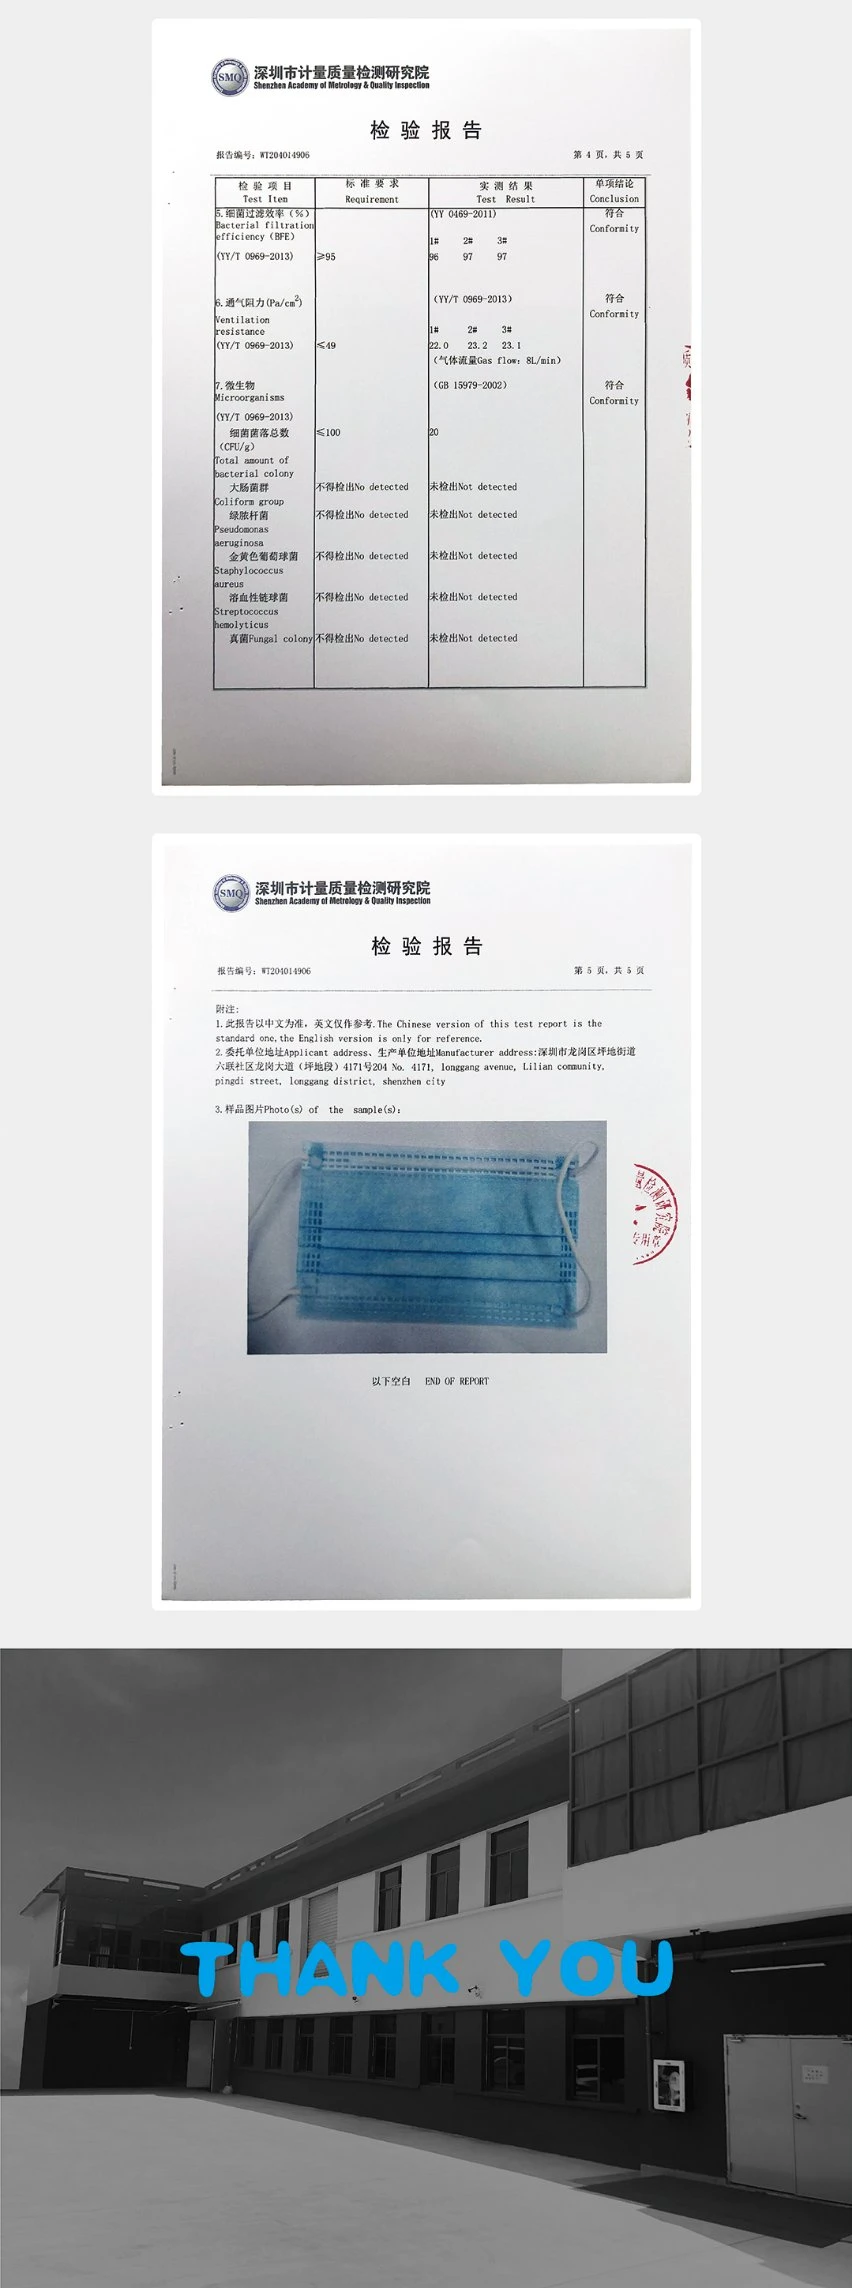 in Stock Wholesale Mask Virus Protective 3 Ply Disposable Face Mask Hot Sale